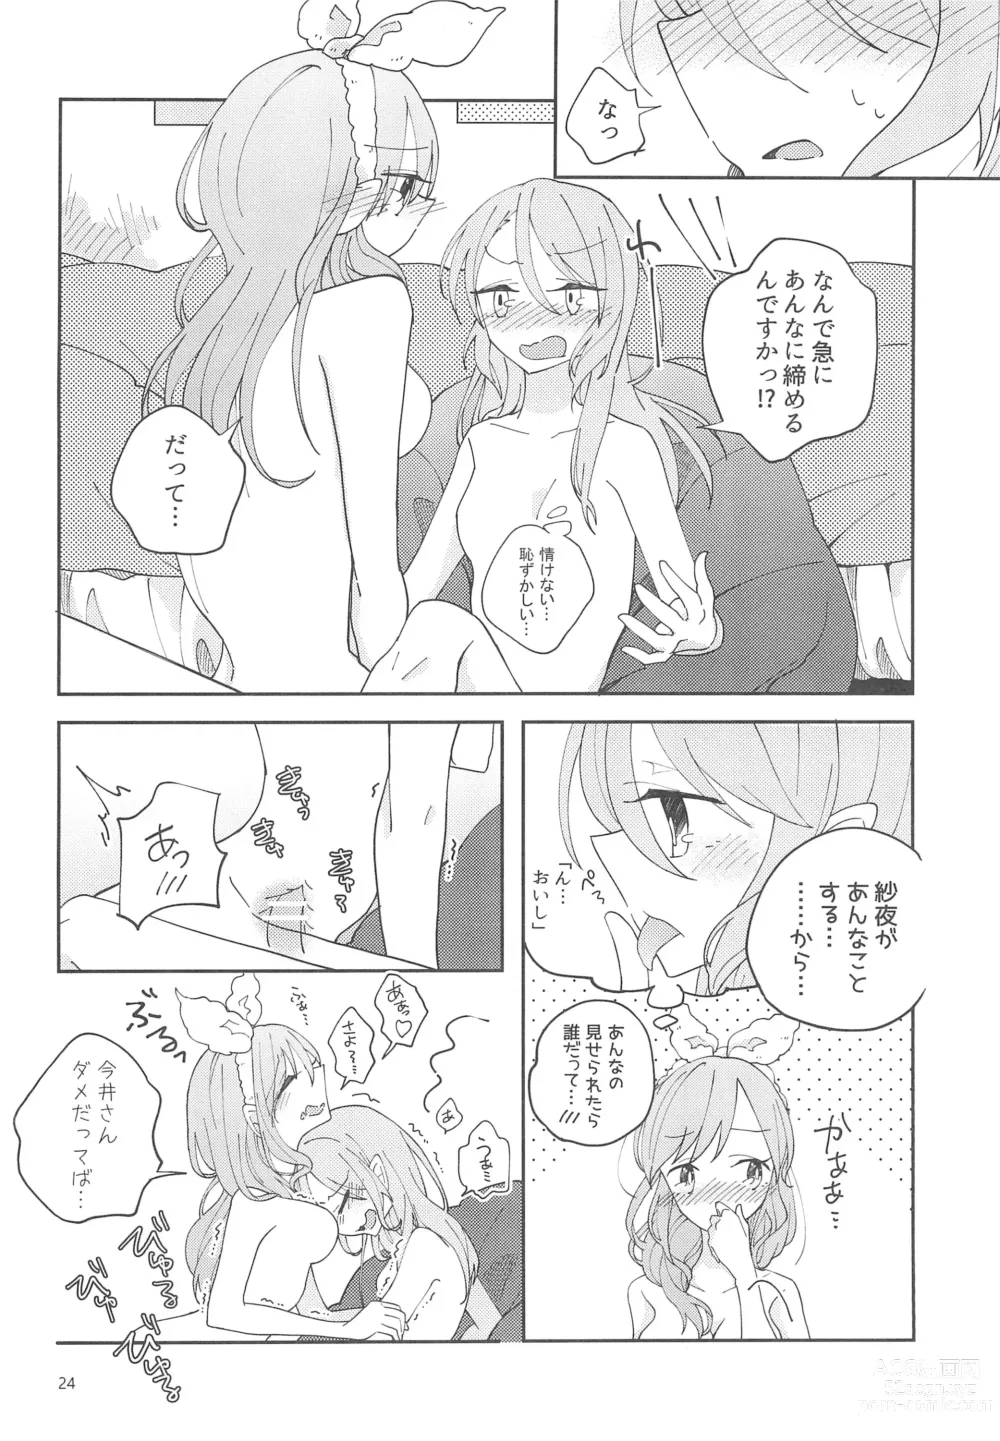 Page 26 of doujinshi I’m crazy about you.